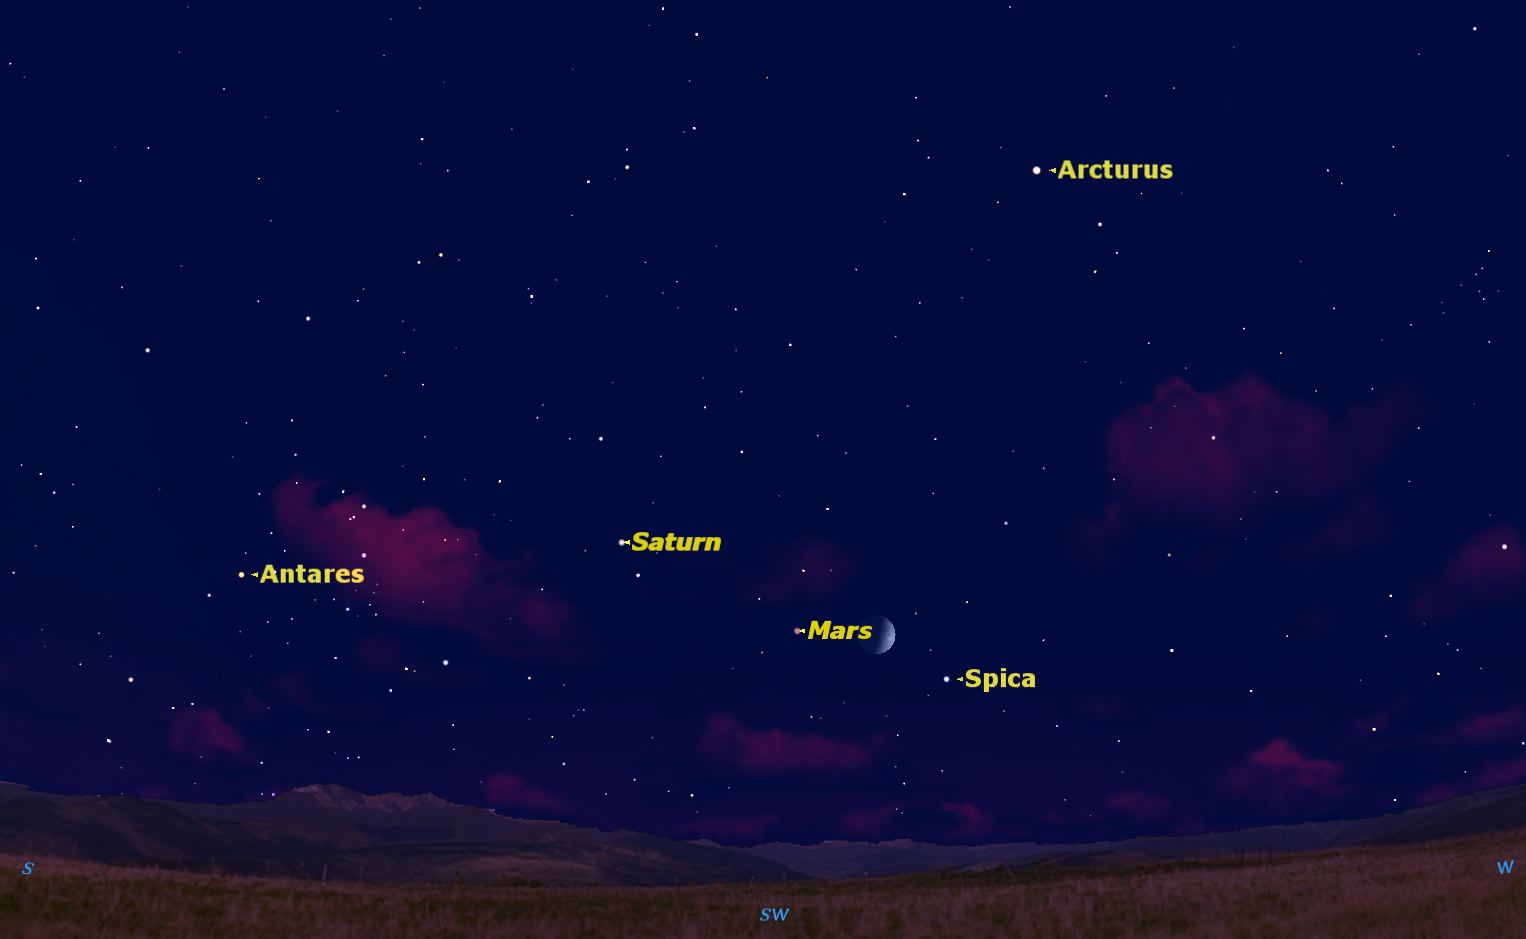 On August 2, the Moon has moved to lie between Spica and Mars. Credit: Starry Night software.